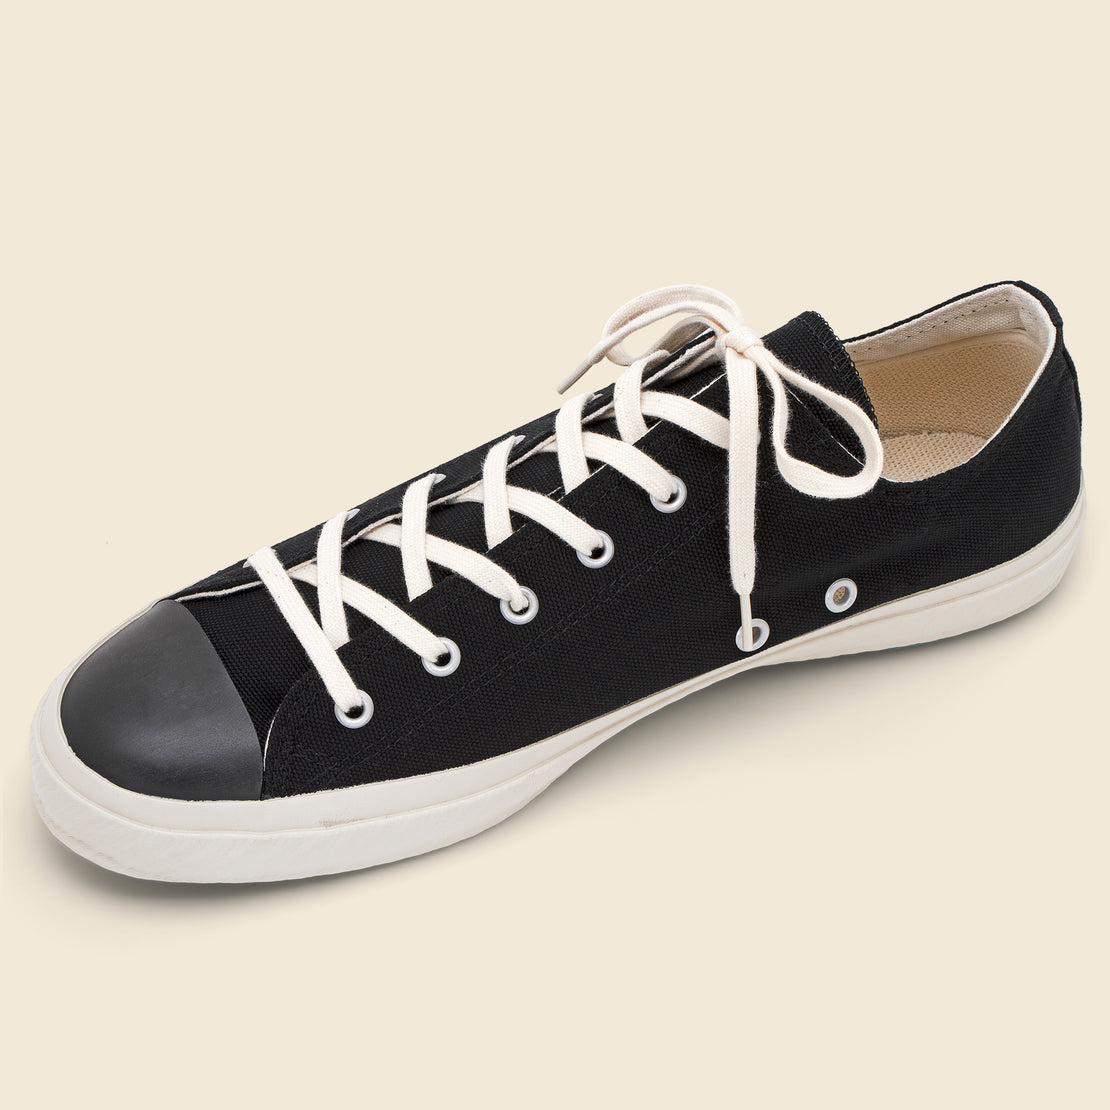 01-JP Lo Sneaker - Black - Shoes Like Pottery - STAG Provisions - Shoes - Athletic